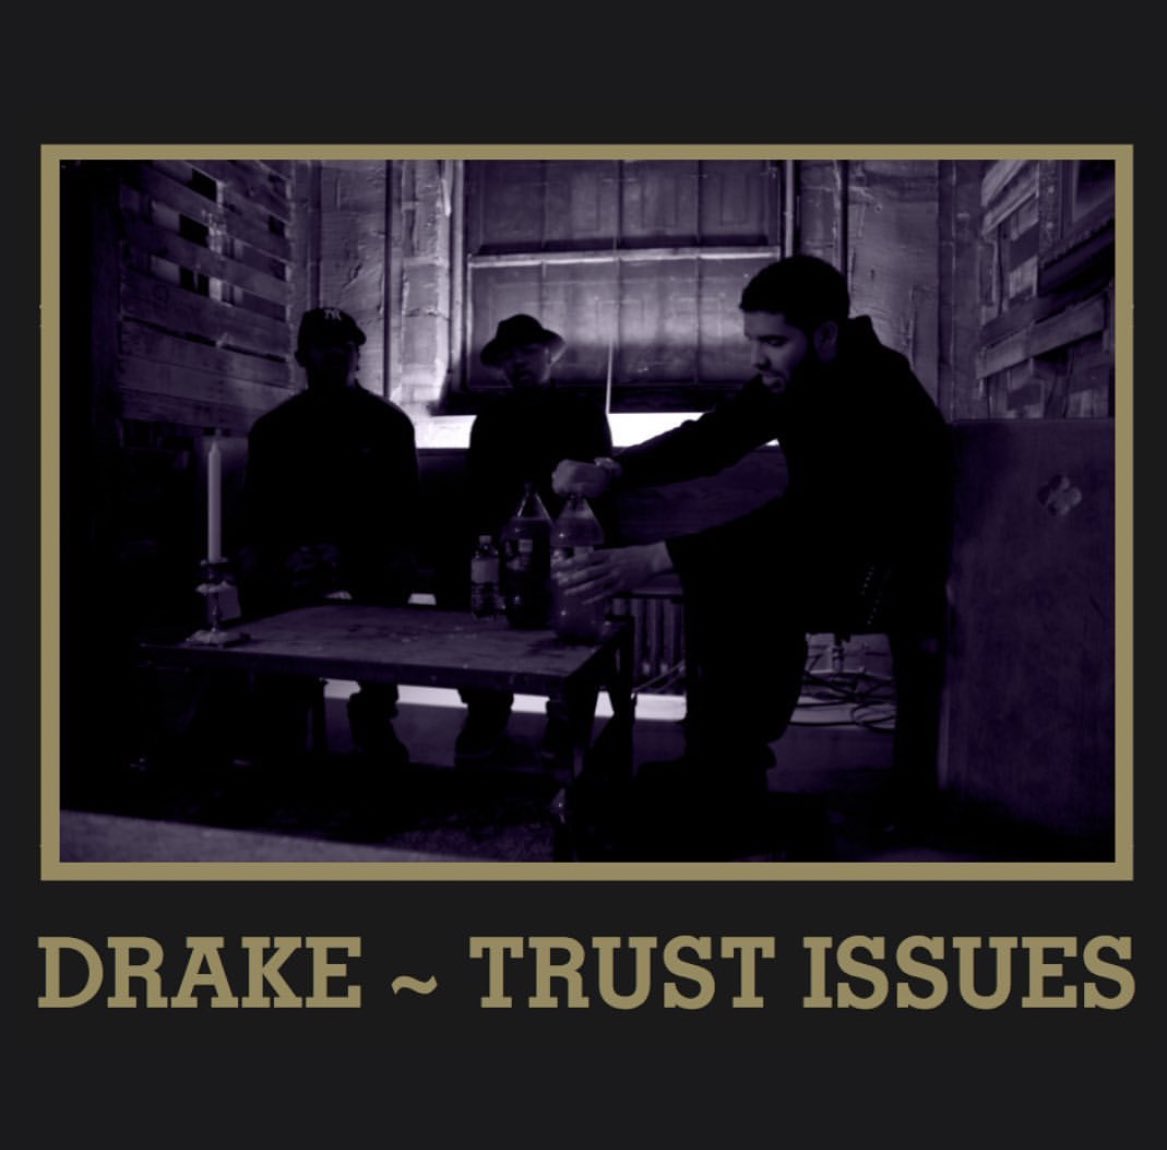 12 years ago today Drake released Trust Issues